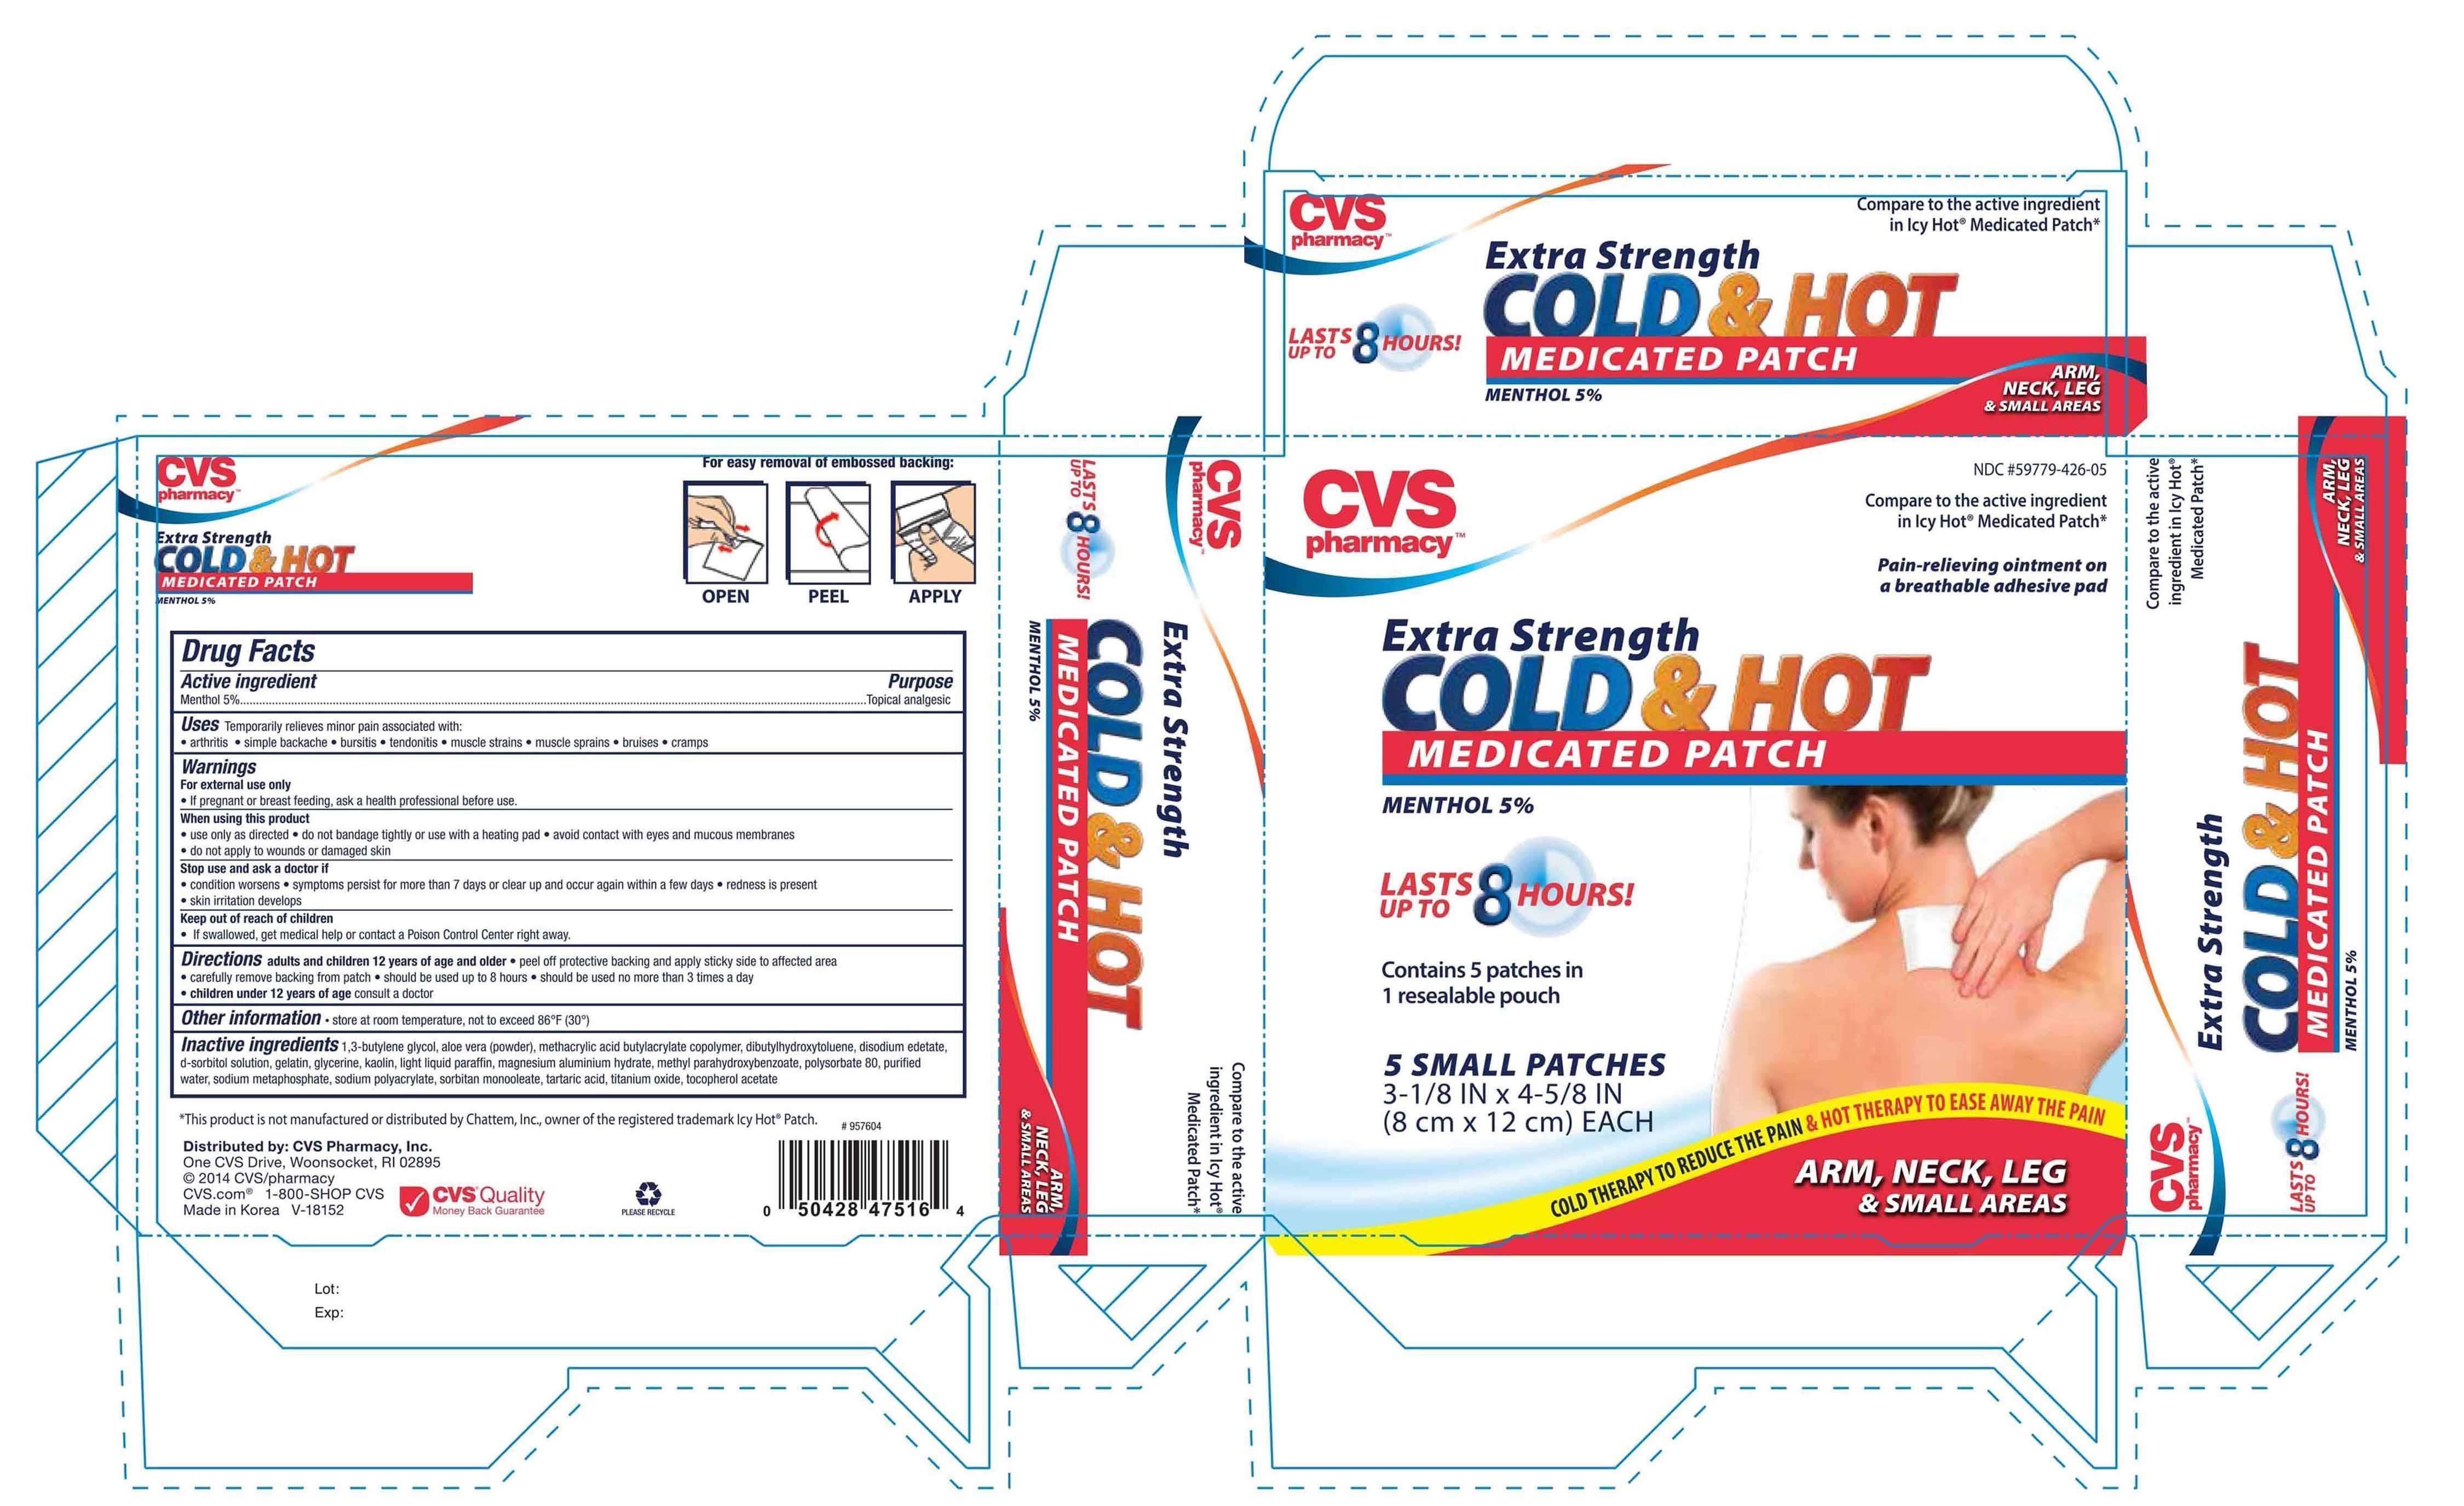 CVS Extra Strength Cold and Hot Medicated Patch